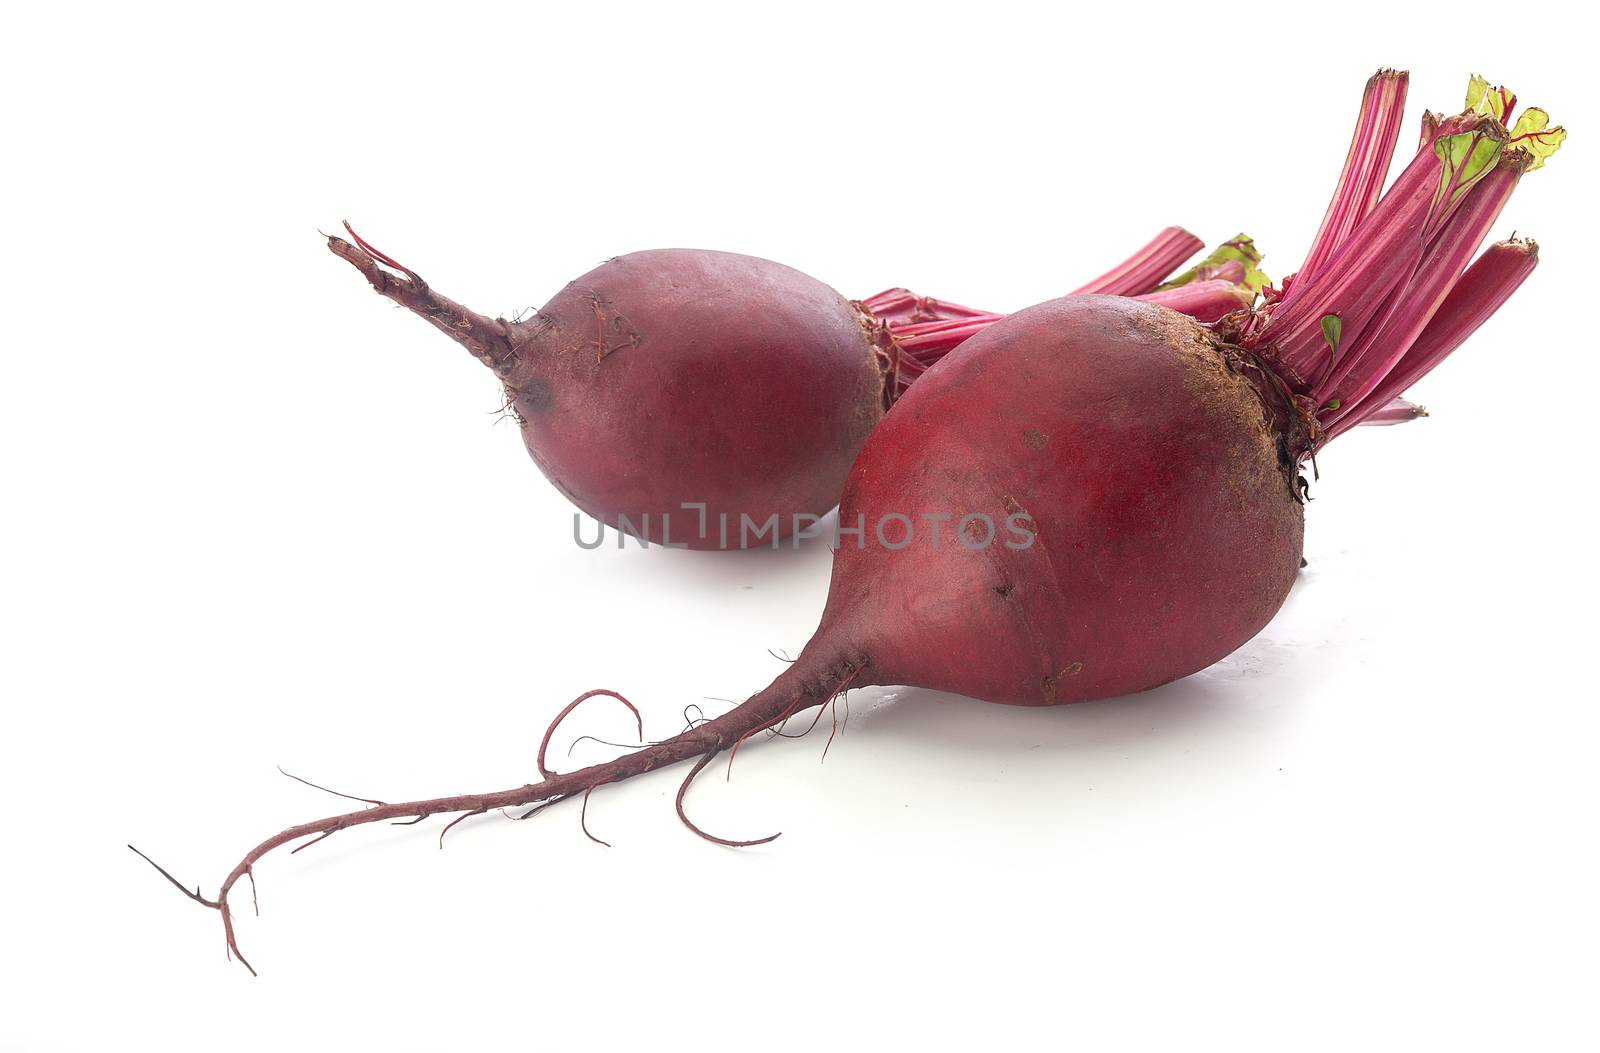 Isolated two whole red beet on the white background